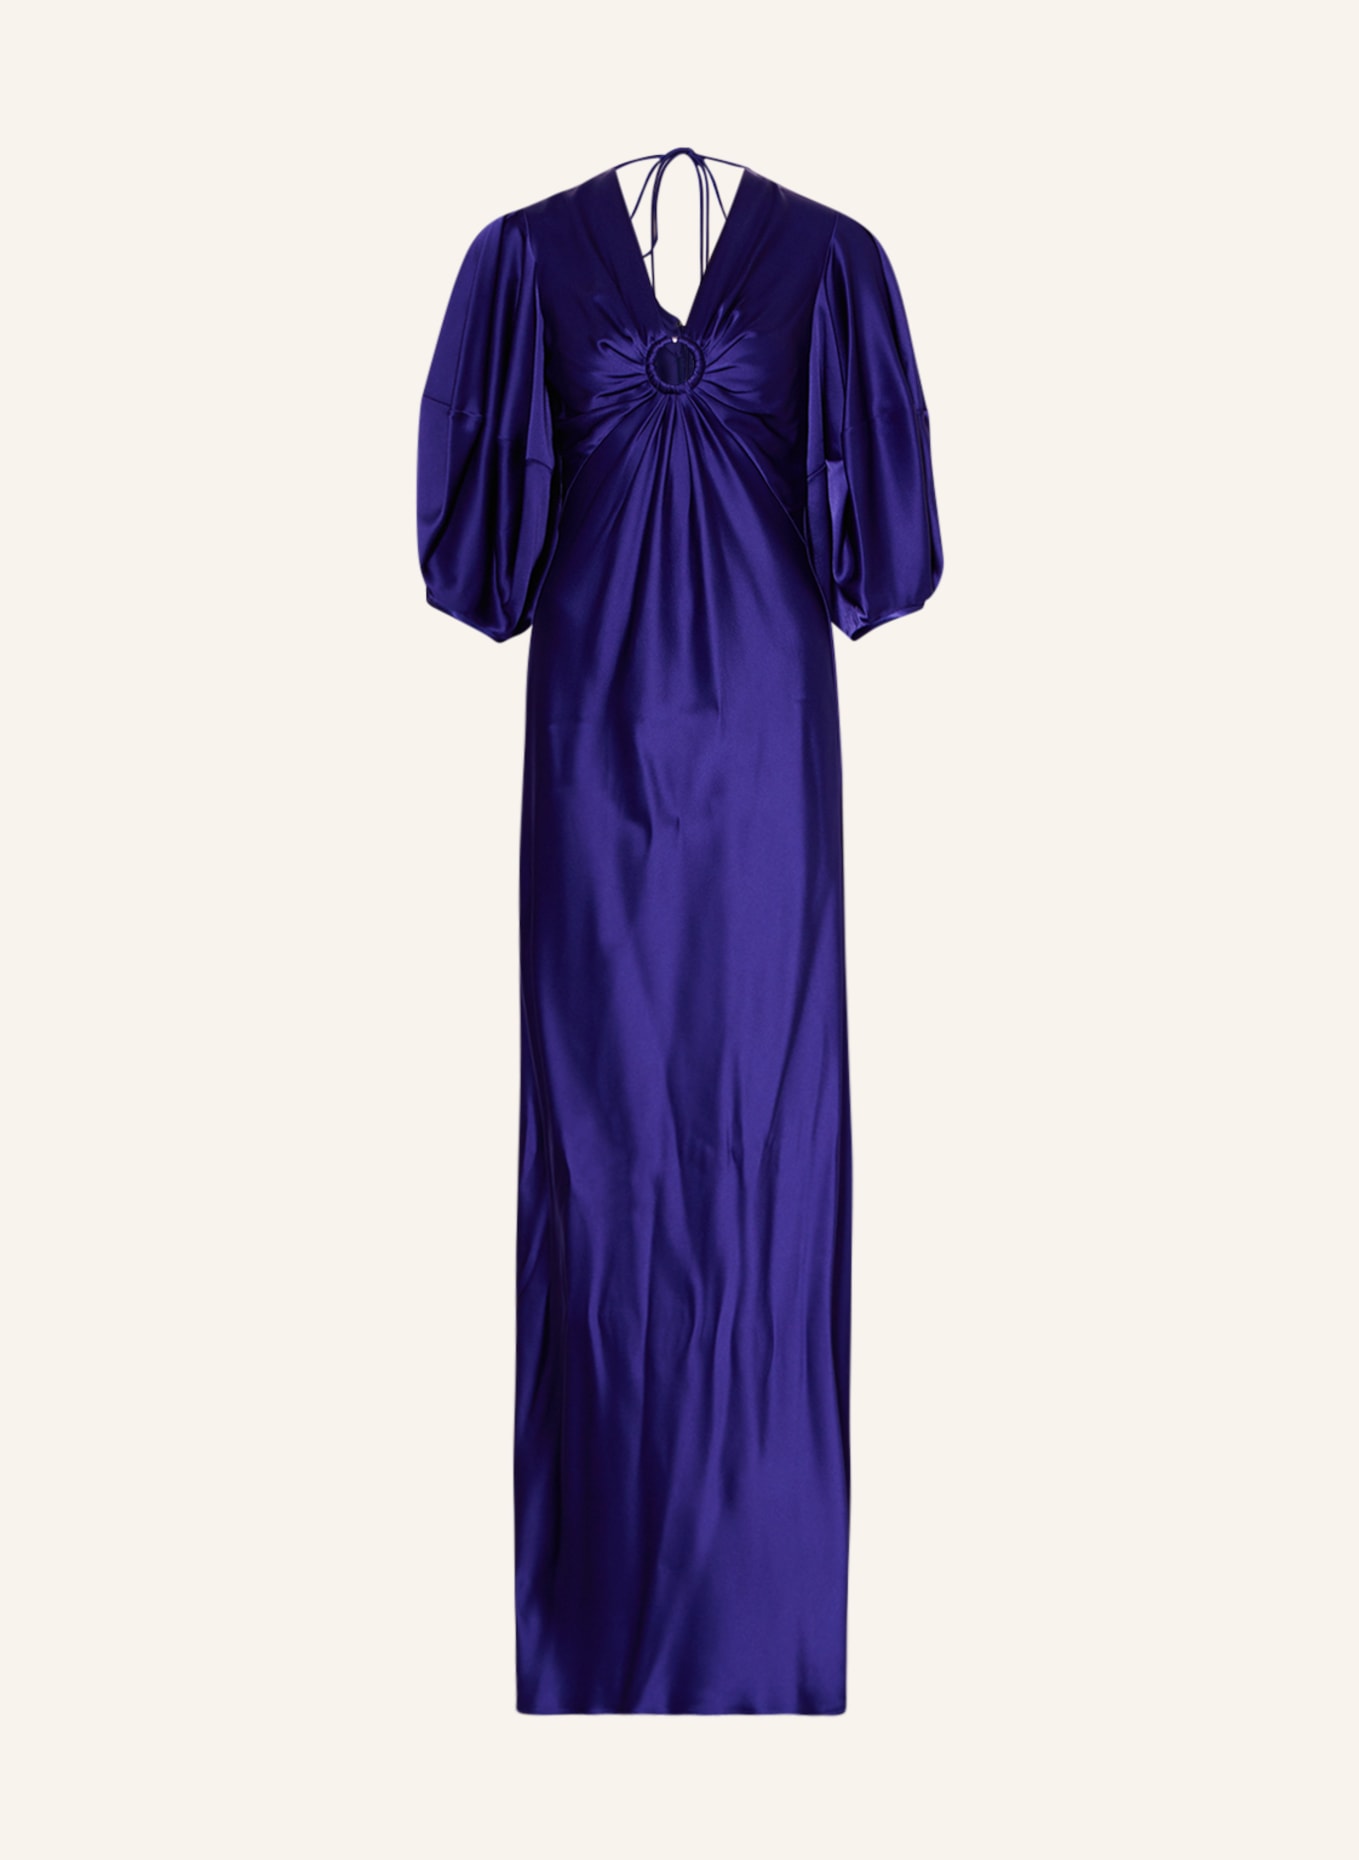 STELLA McCARTNEY Satin dress with 3/4 sleeves, Color: PURPLE (Image 1)